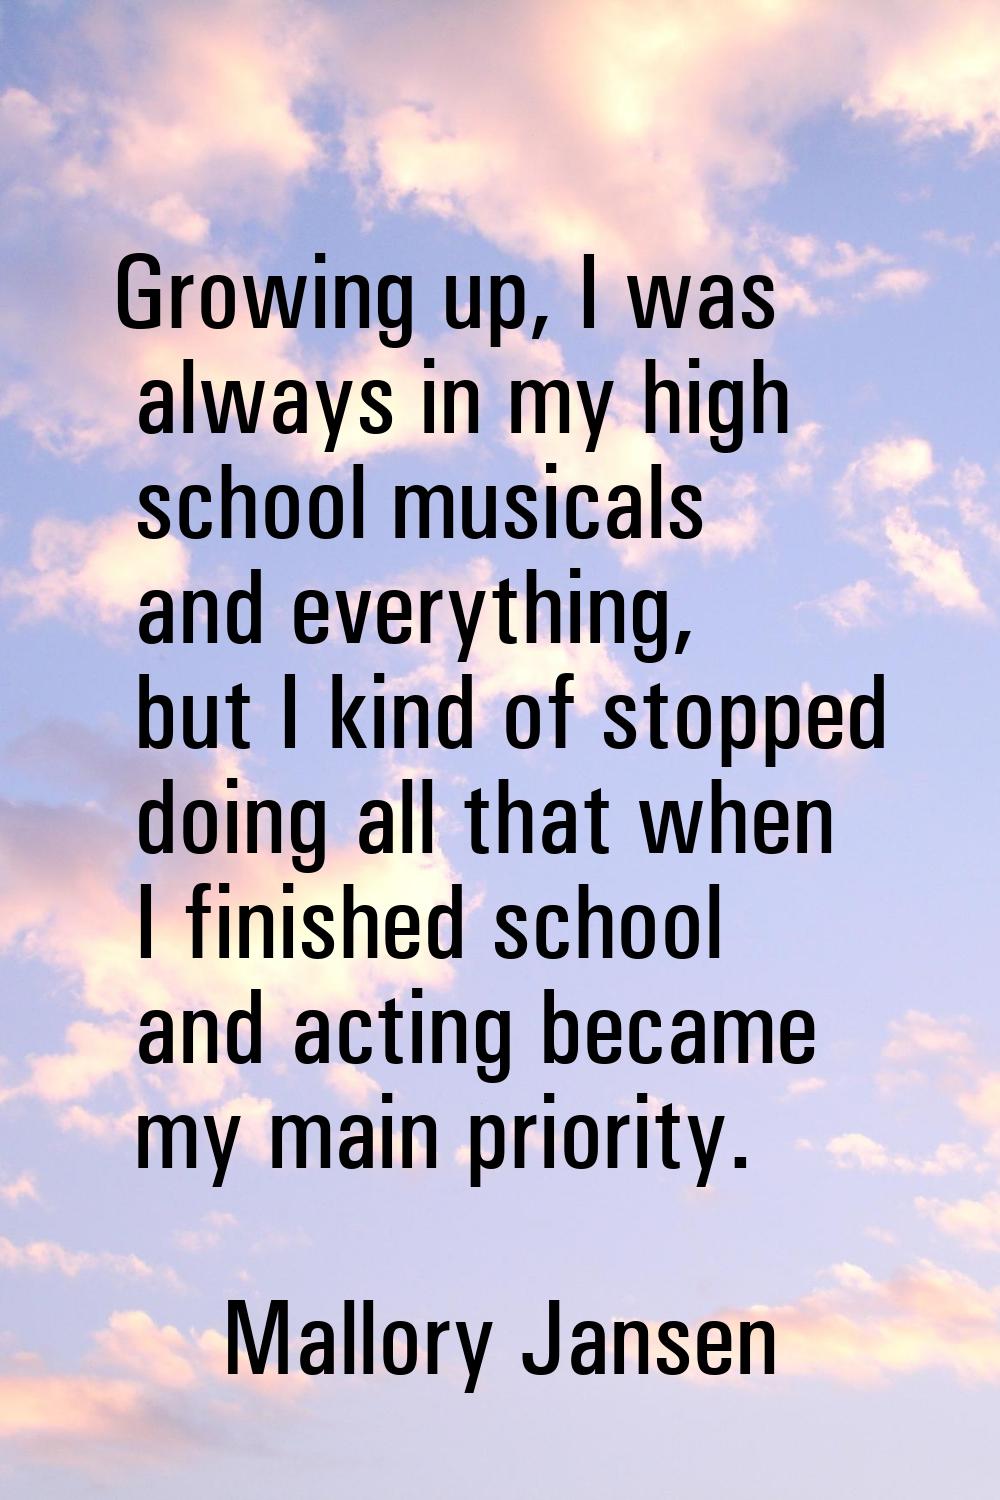 Growing up, I was always in my high school musicals and everything, but I kind of stopped doing all